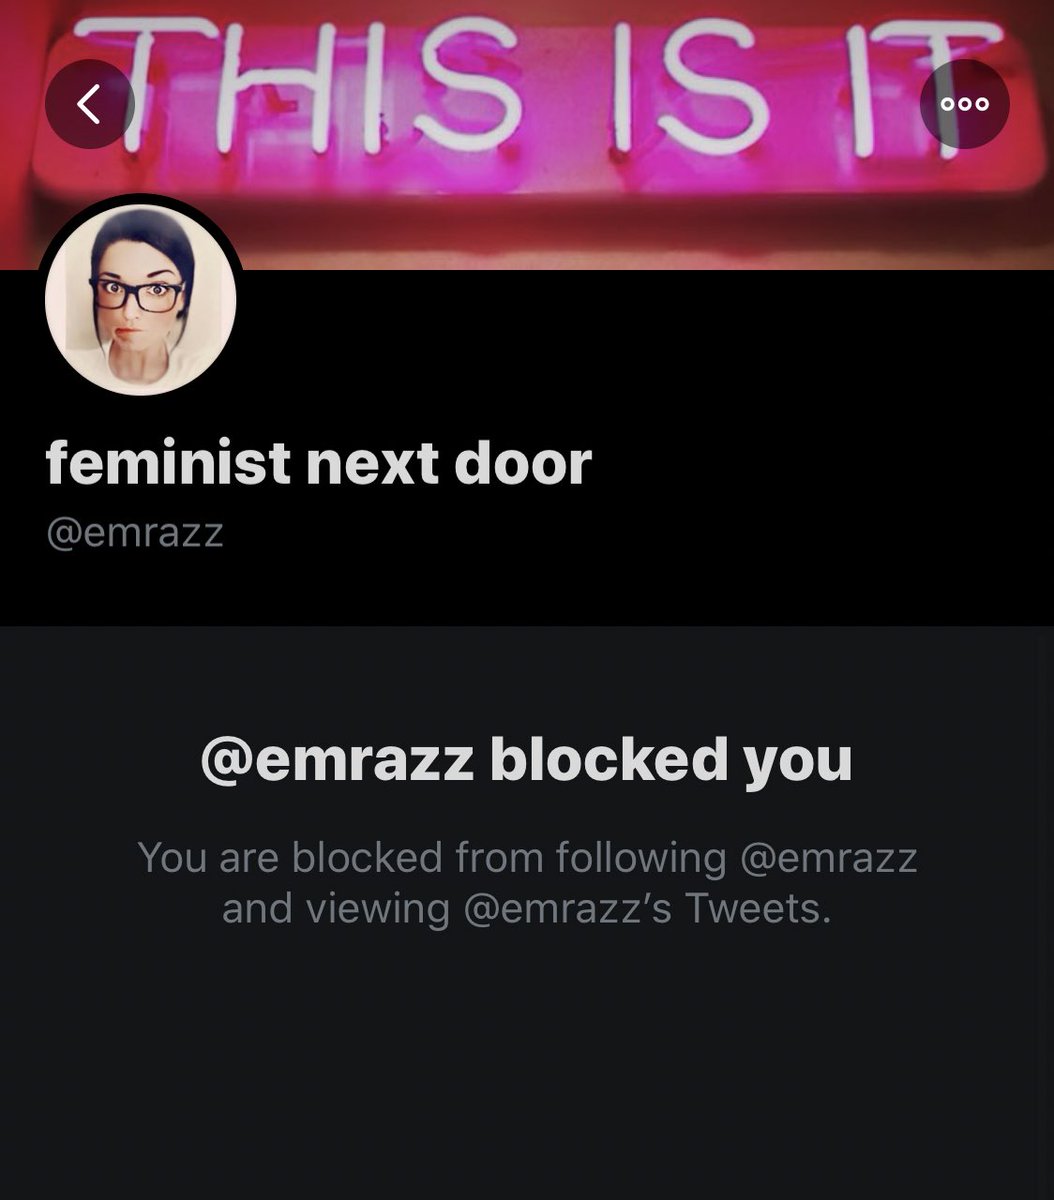  @emrazz, aka “The Feminist Next Door” has blocked me, like many other women who disagree with her. I originally followed her because many of my feminist friends follow her. I’ve been so disappointed. This woman should not have the platform we have handed her.